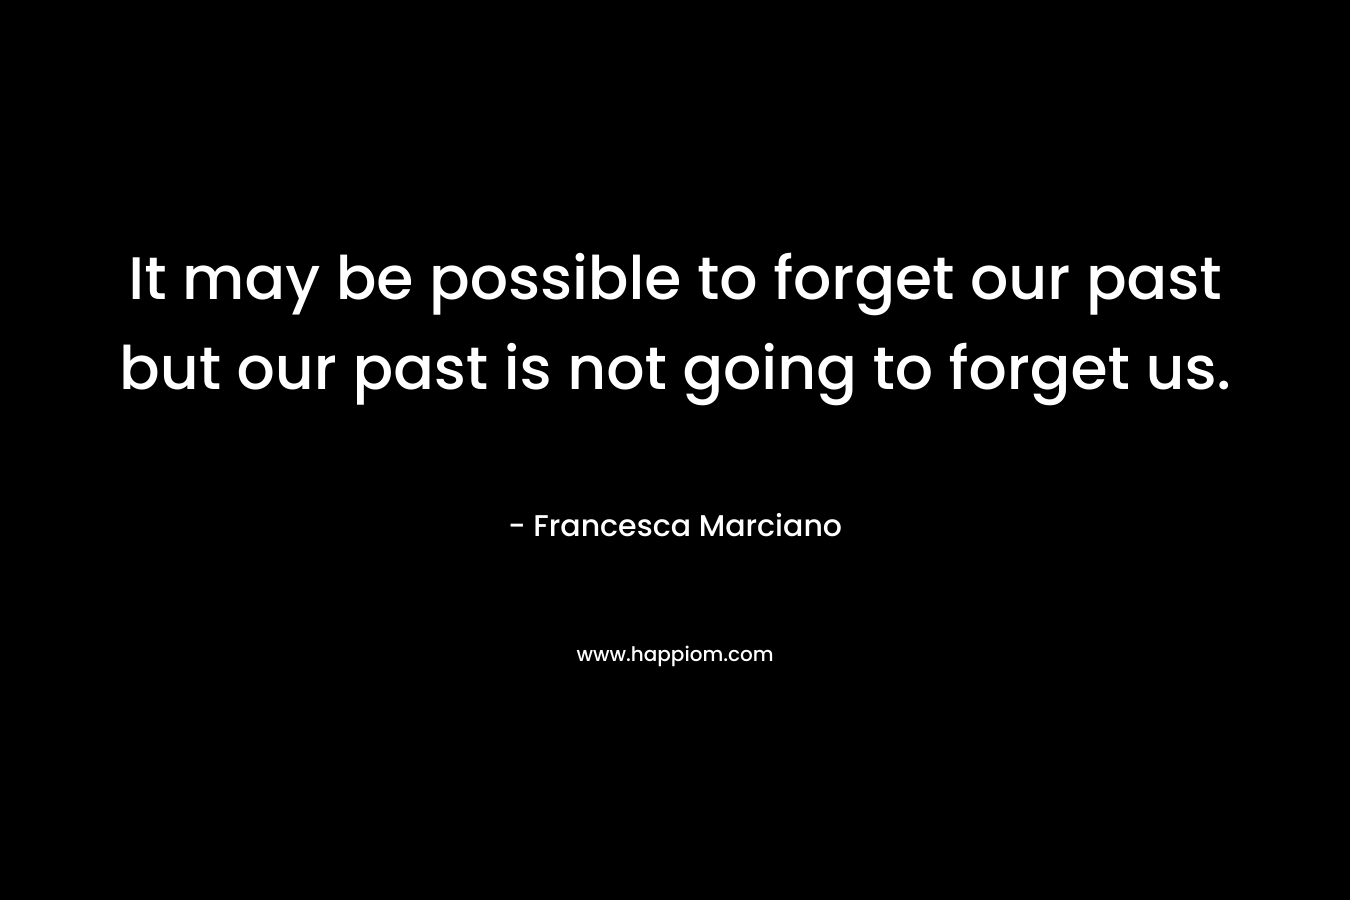 It may be possible to forget our past but our past is not going to forget us.